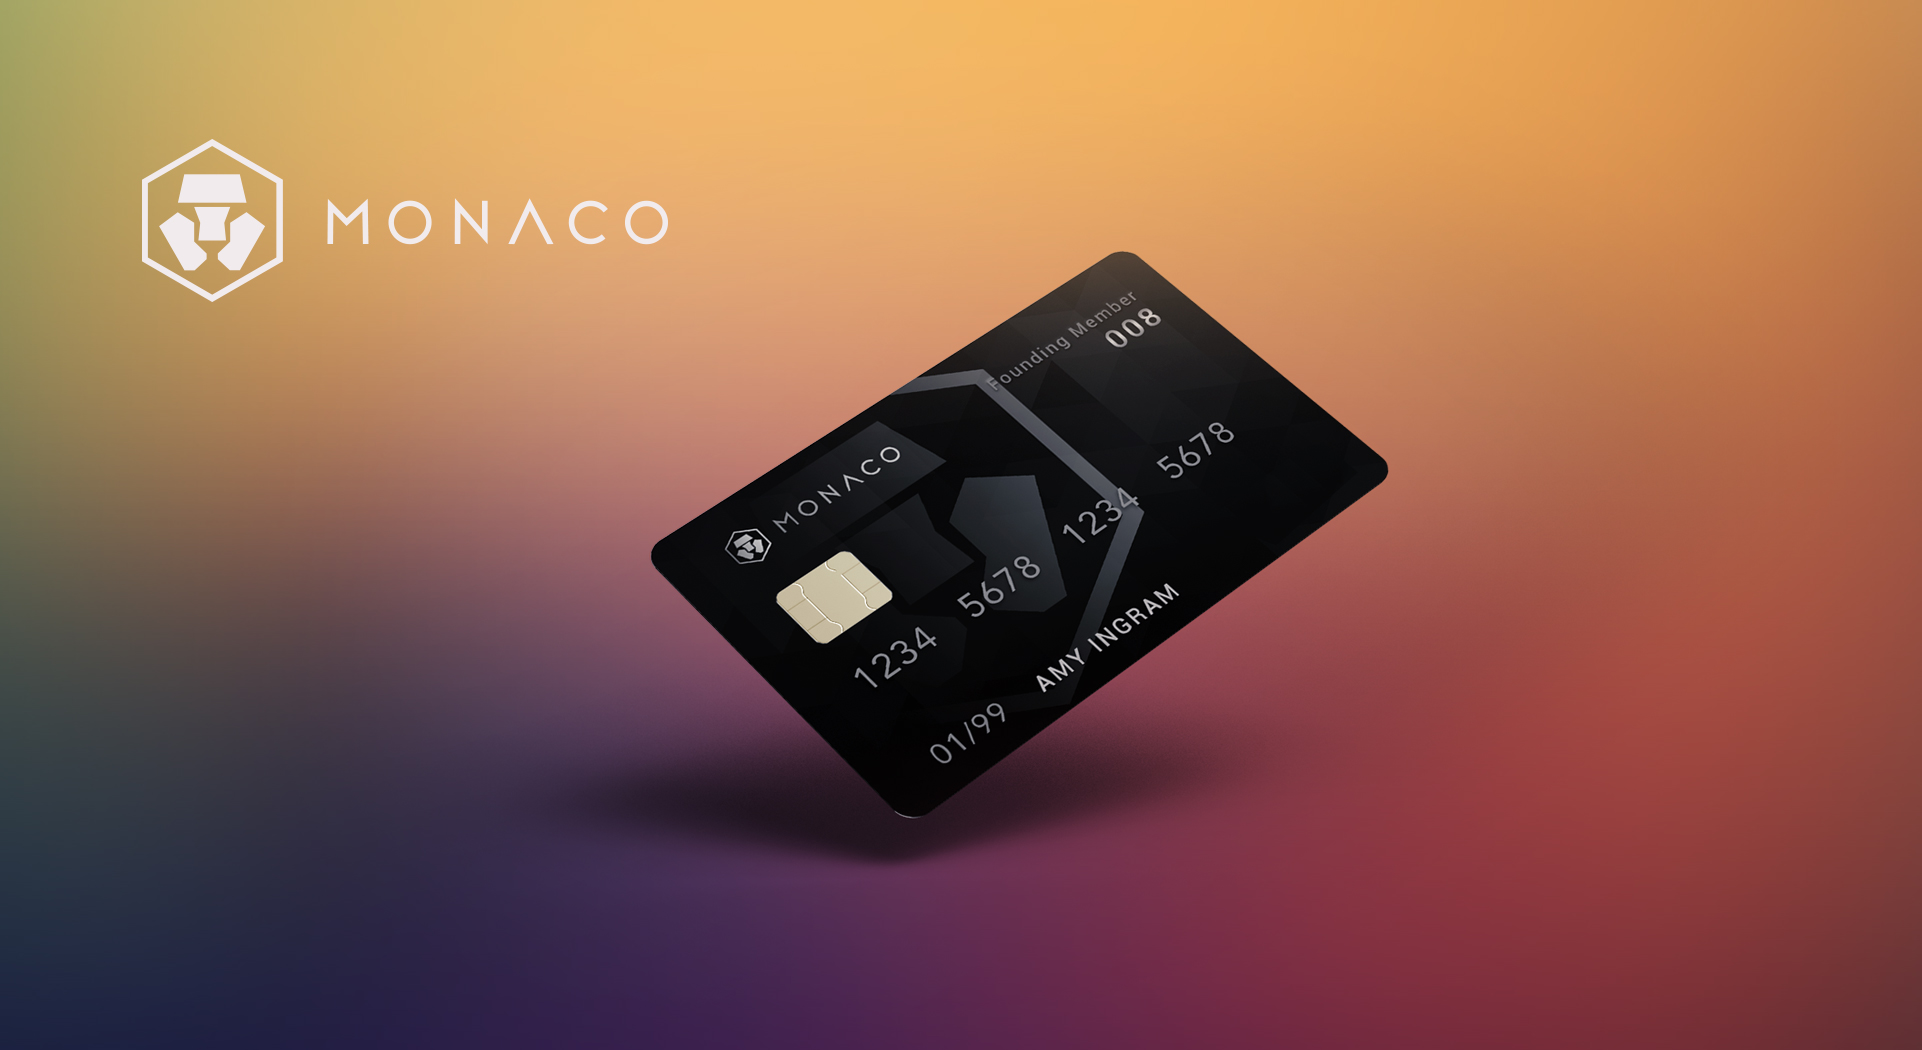 Monaco Cryptocurrency Card Comes out of Stealth Mode for ICO Starting May 18th